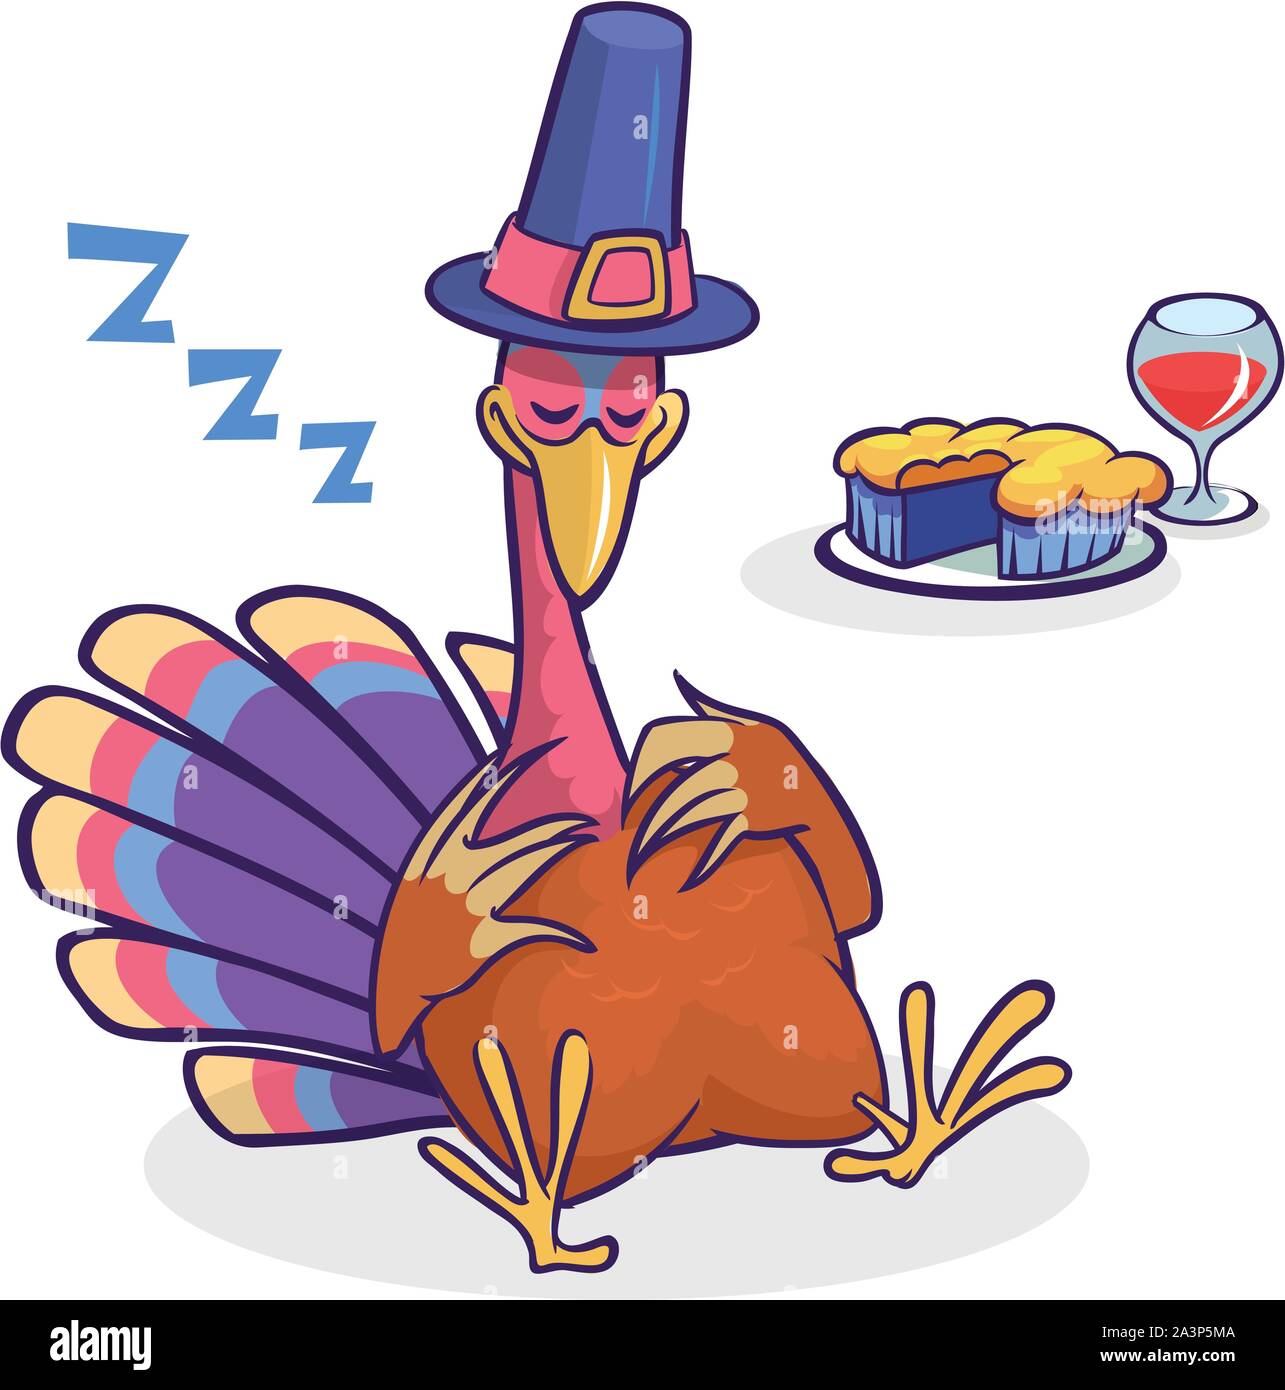 Thanksgiving Cartoon Turkey Character Sleeping Isolated Vector Illustration Clipart Stock Vector Image Art Alamy Baby hazel thanksgiving turkey day game hazel baby gameplay cartoon full episodes baby games syl. https www alamy com thanksgiving cartoon turkey character sleeping isolated vector illustration clipart image329328394 html